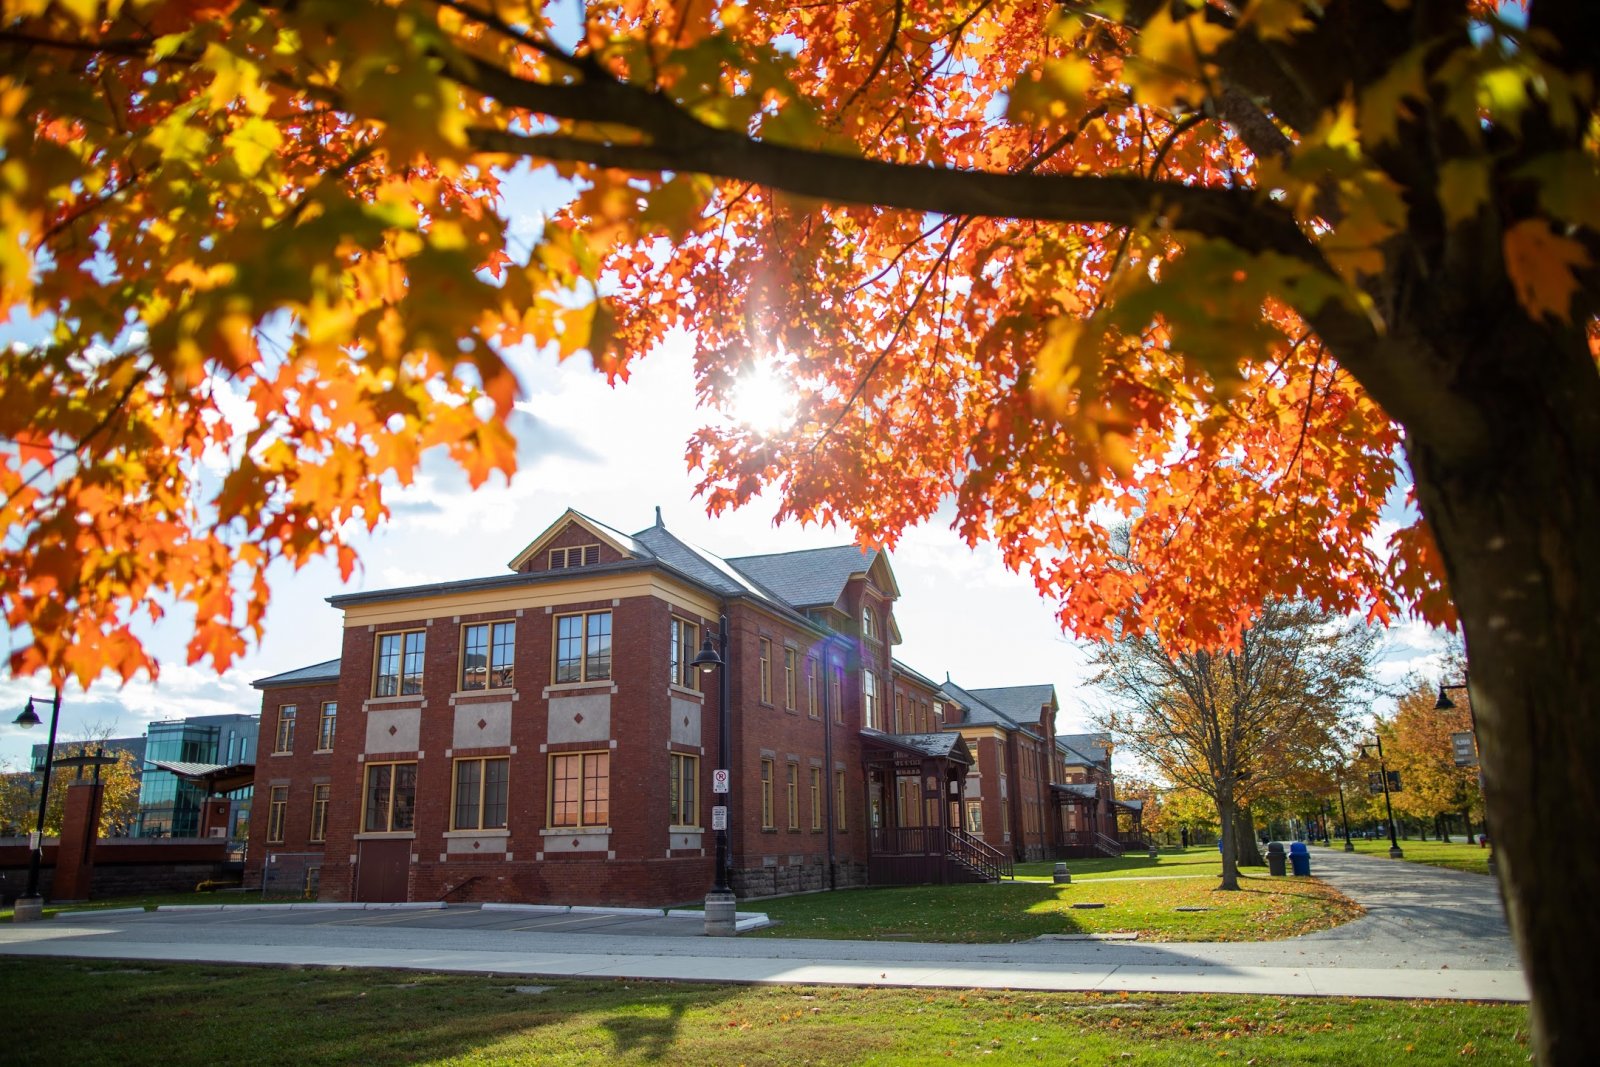 Exterior view of Humber's Lakeshore campus with colourful fall leaves in the foreground.